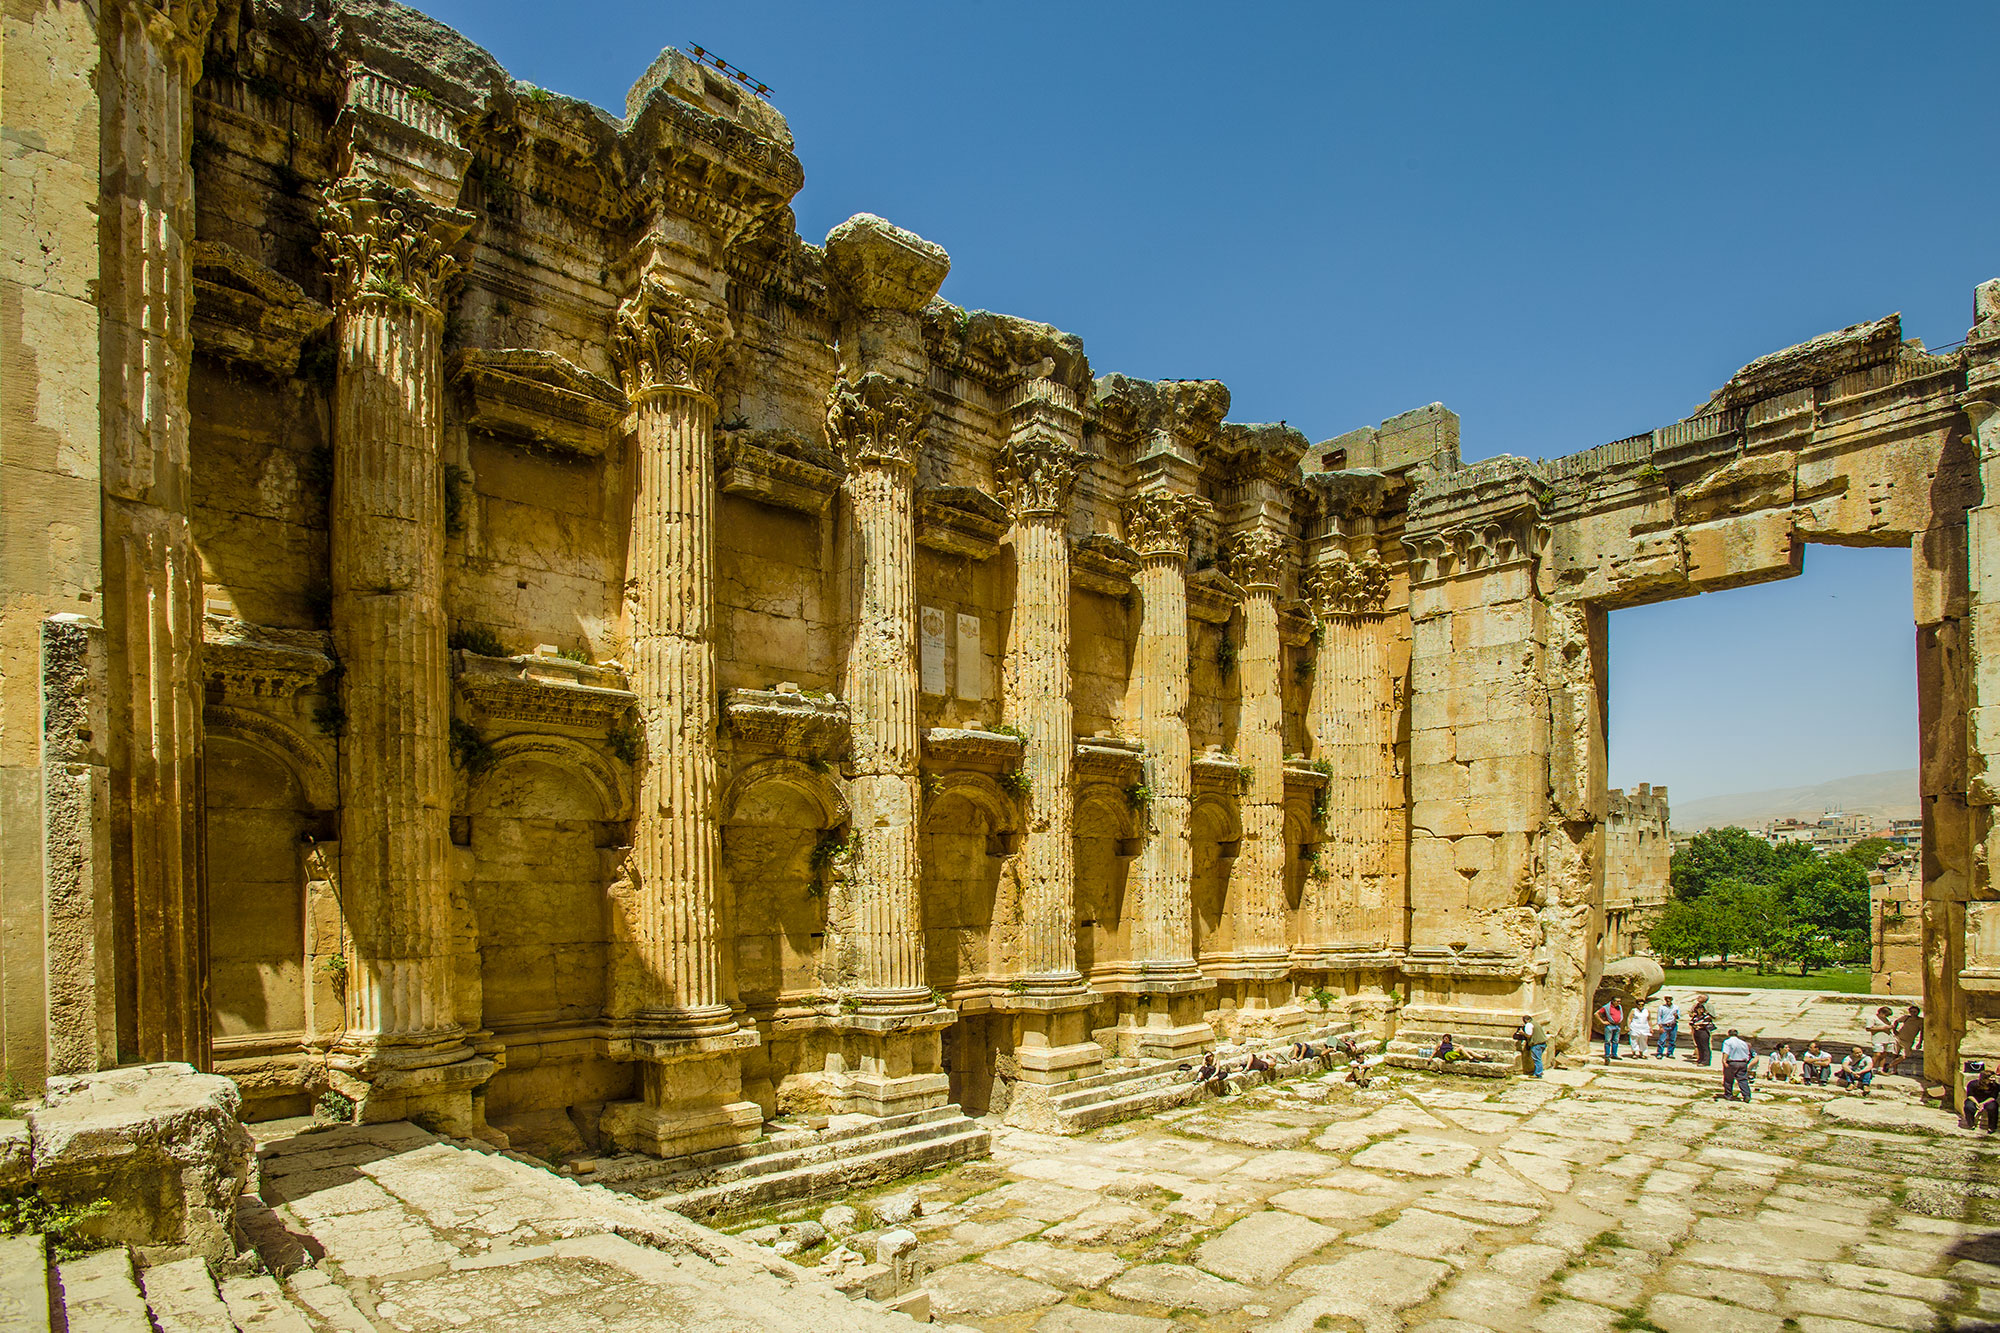 The Temple of Bacchus at Baalbek - Inside